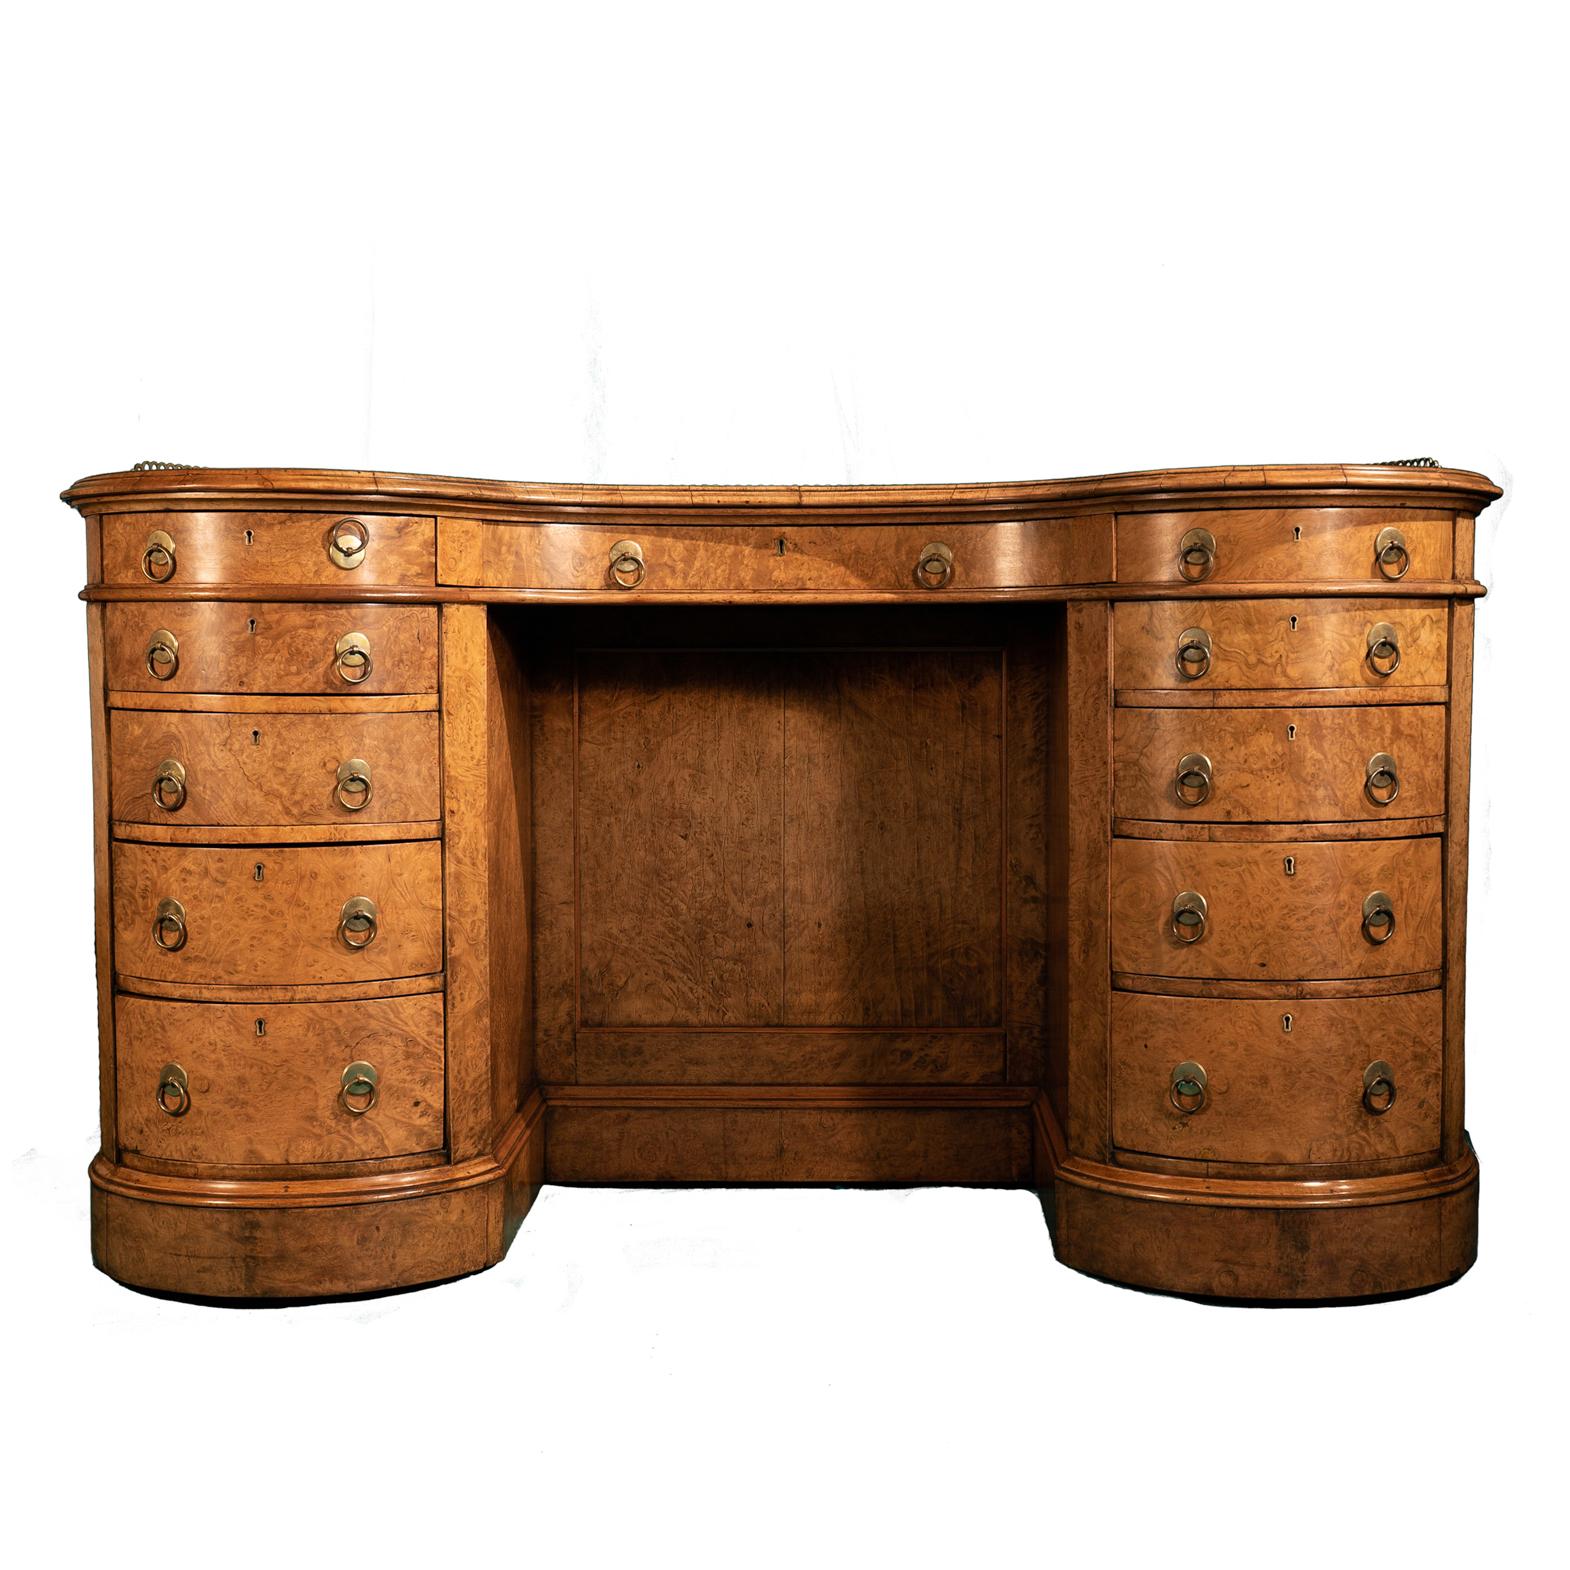 British Gillows Style Kidney Shaped Desk